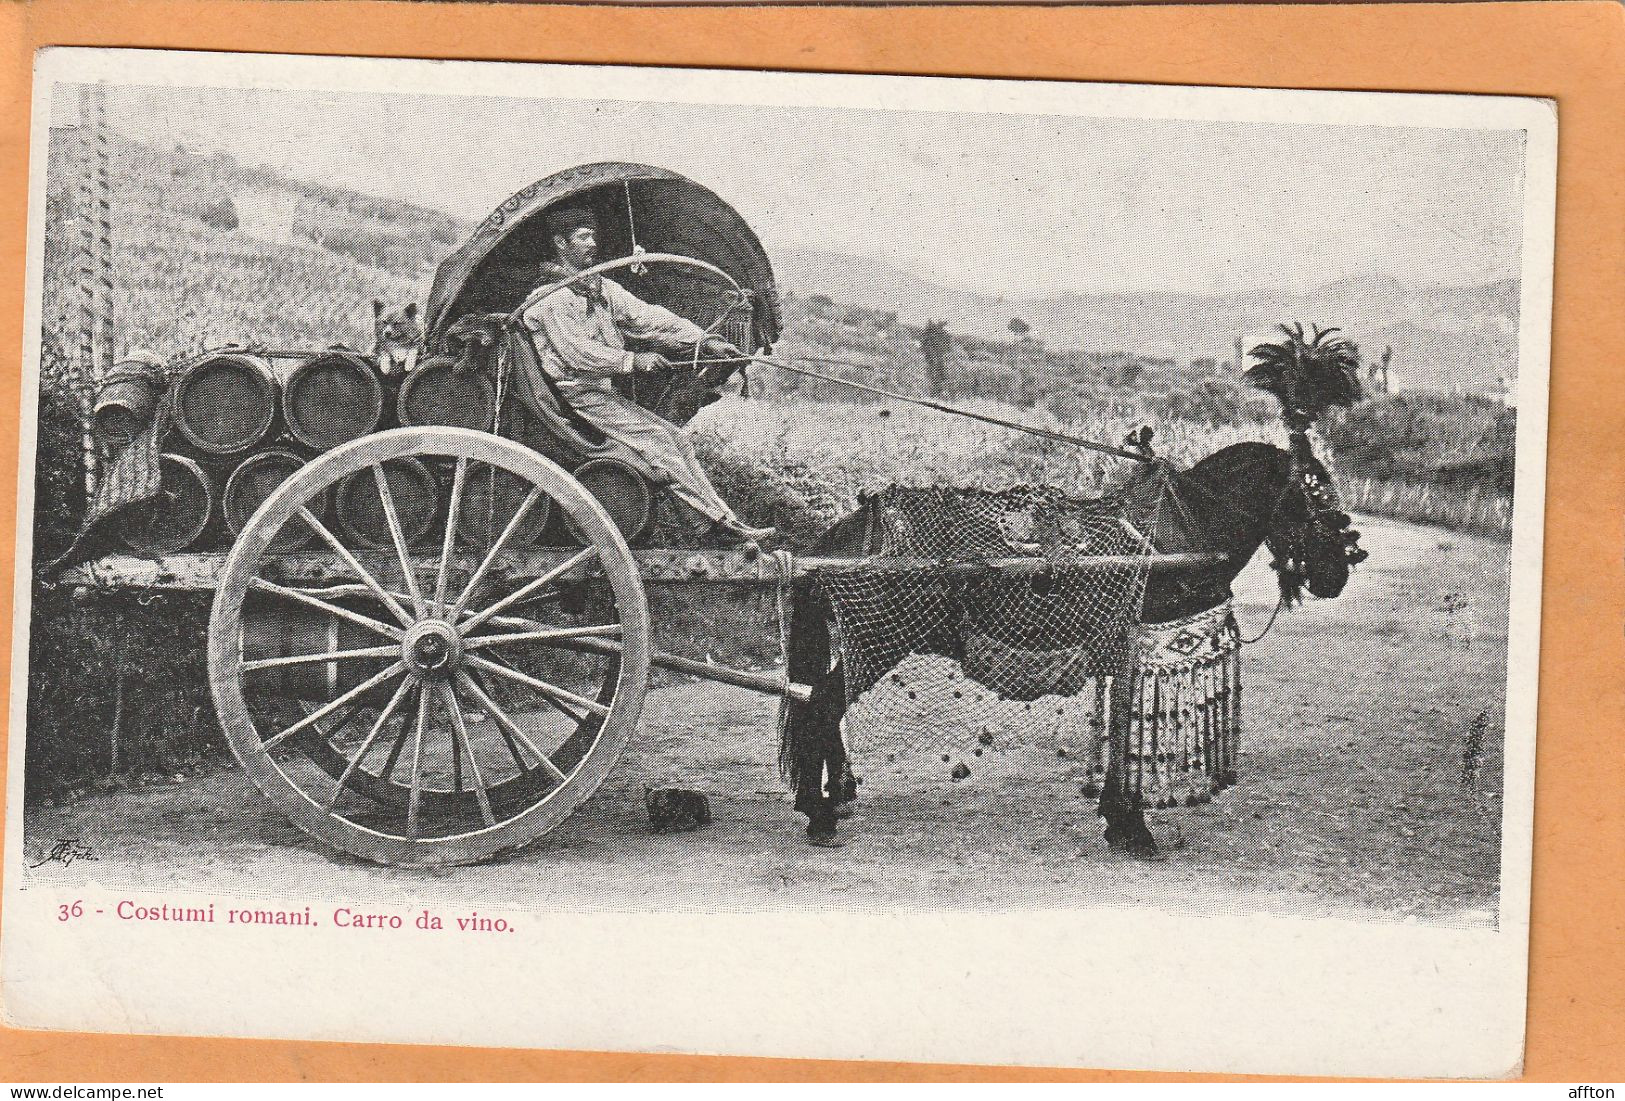 Rome Types Transport Wine Italy Old  Postcard - Transportes